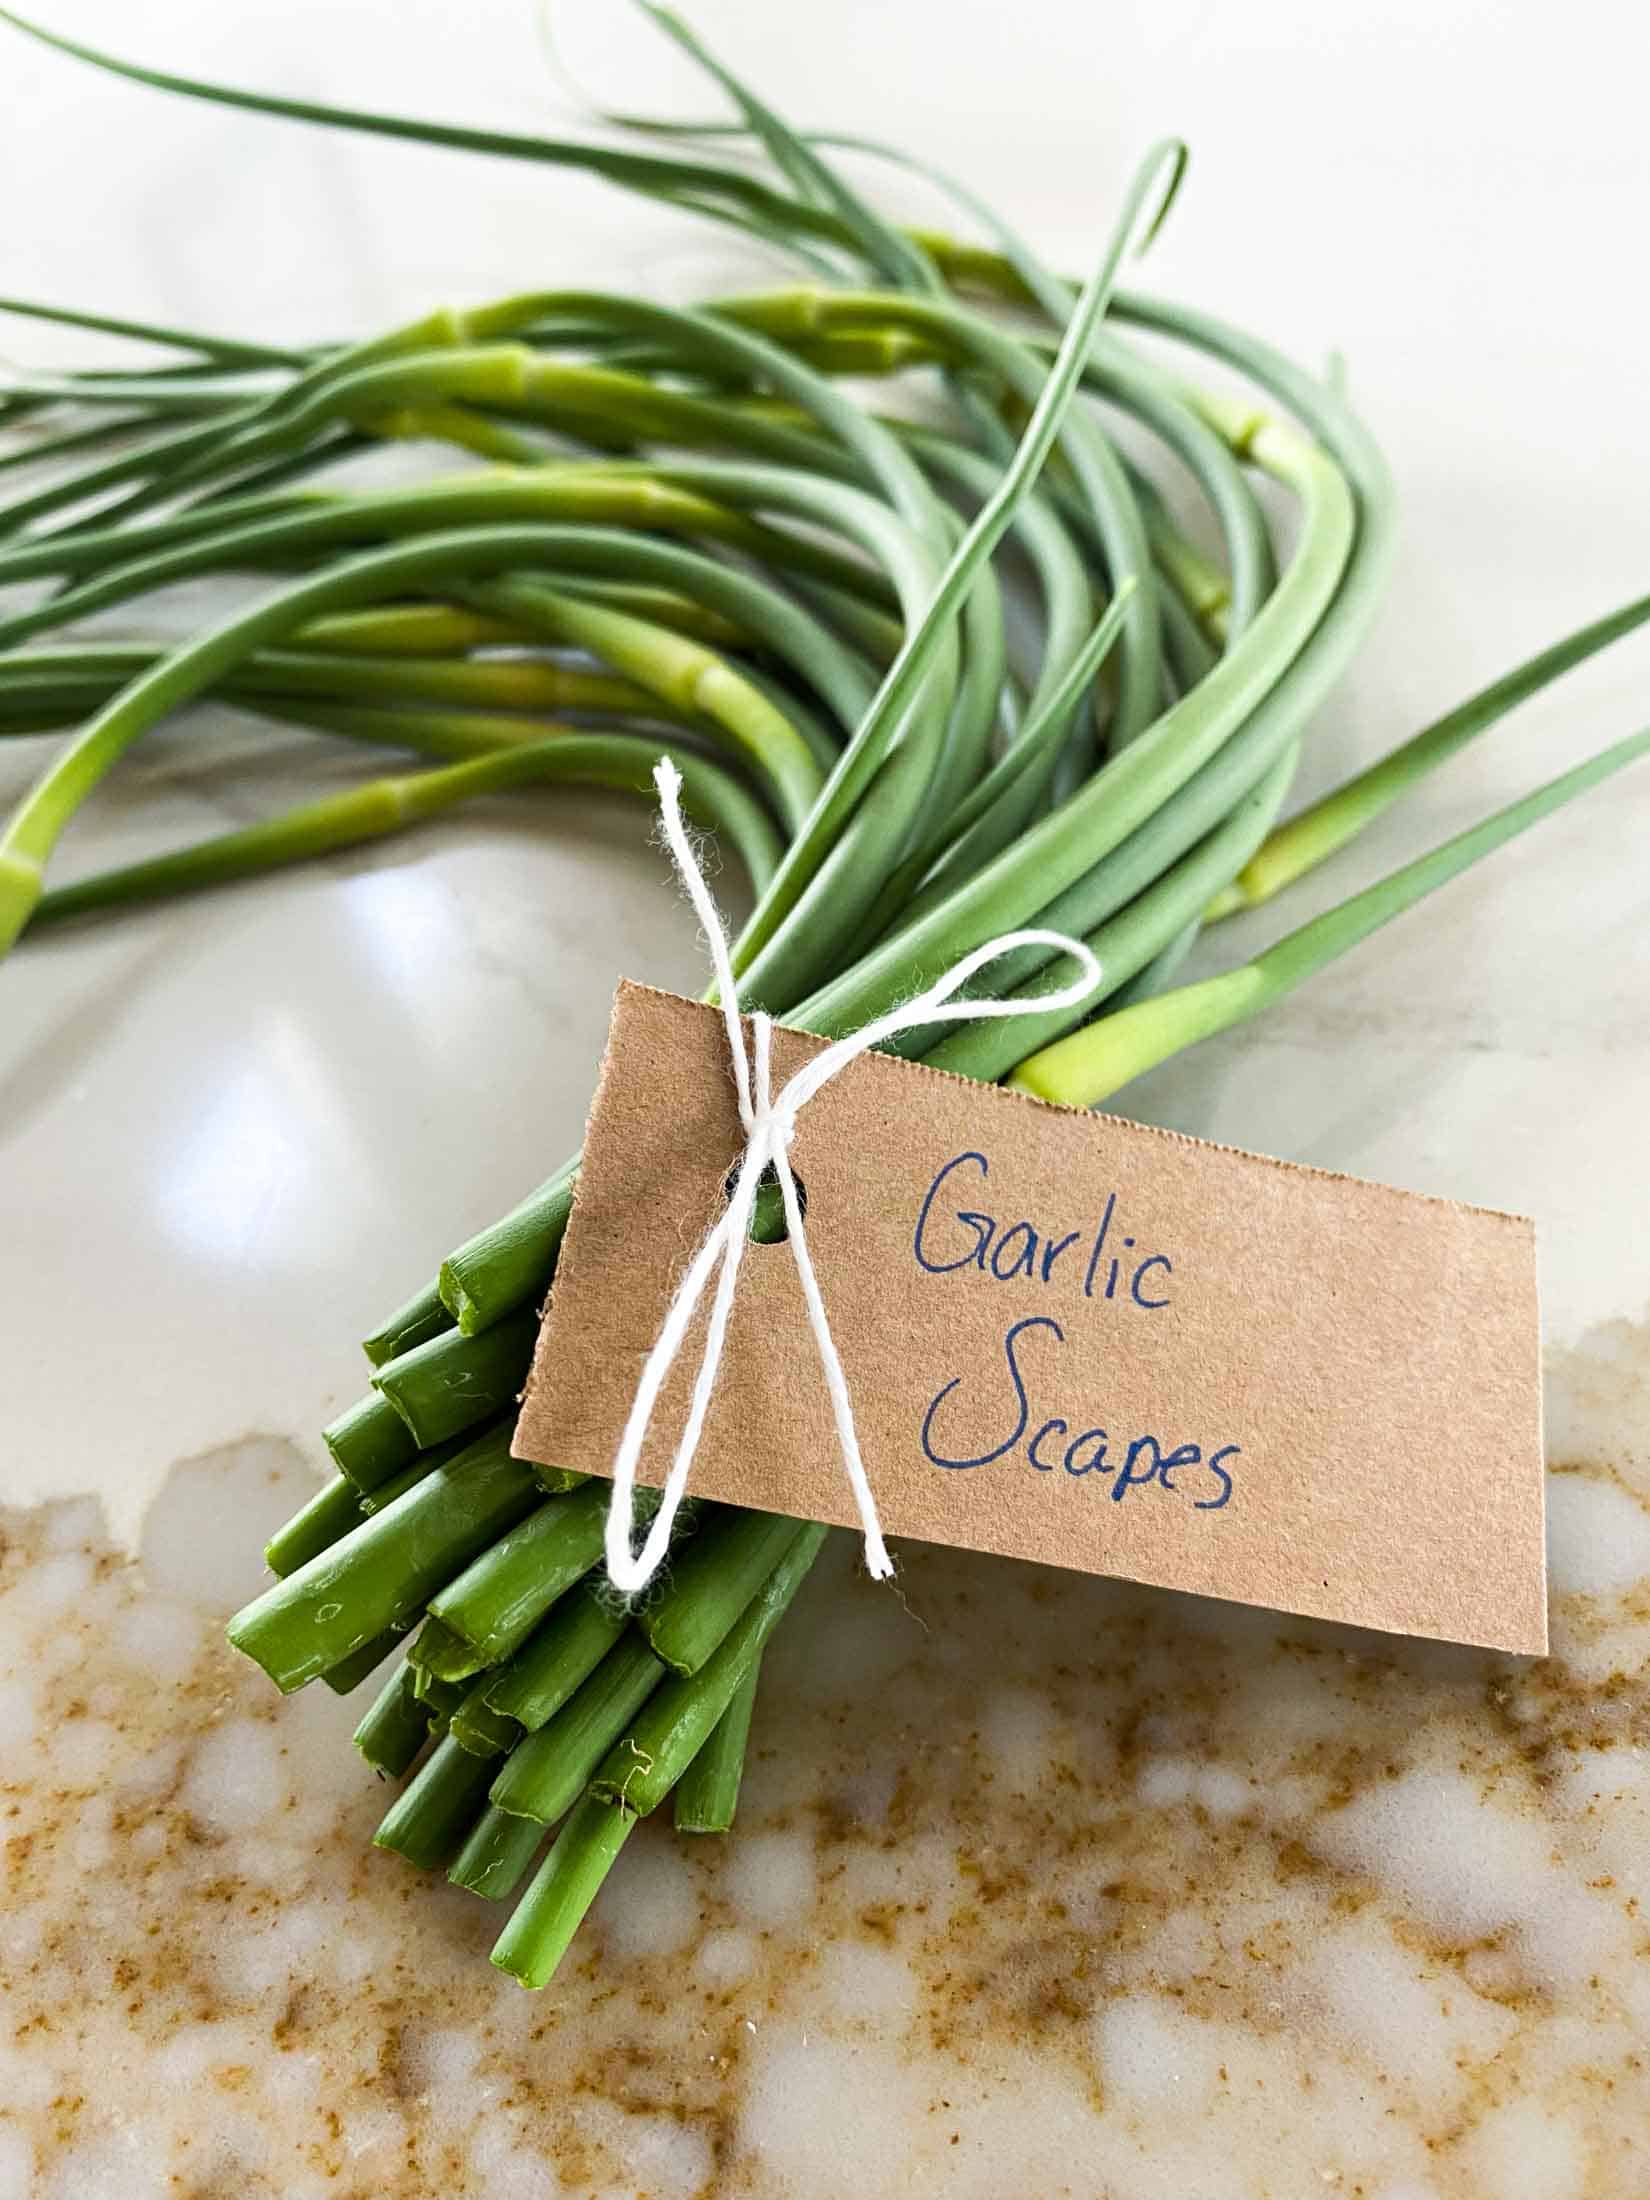 Harvesting Garlic Scapes | A Complete Guide For When & How To Harvest Garlic Scapes